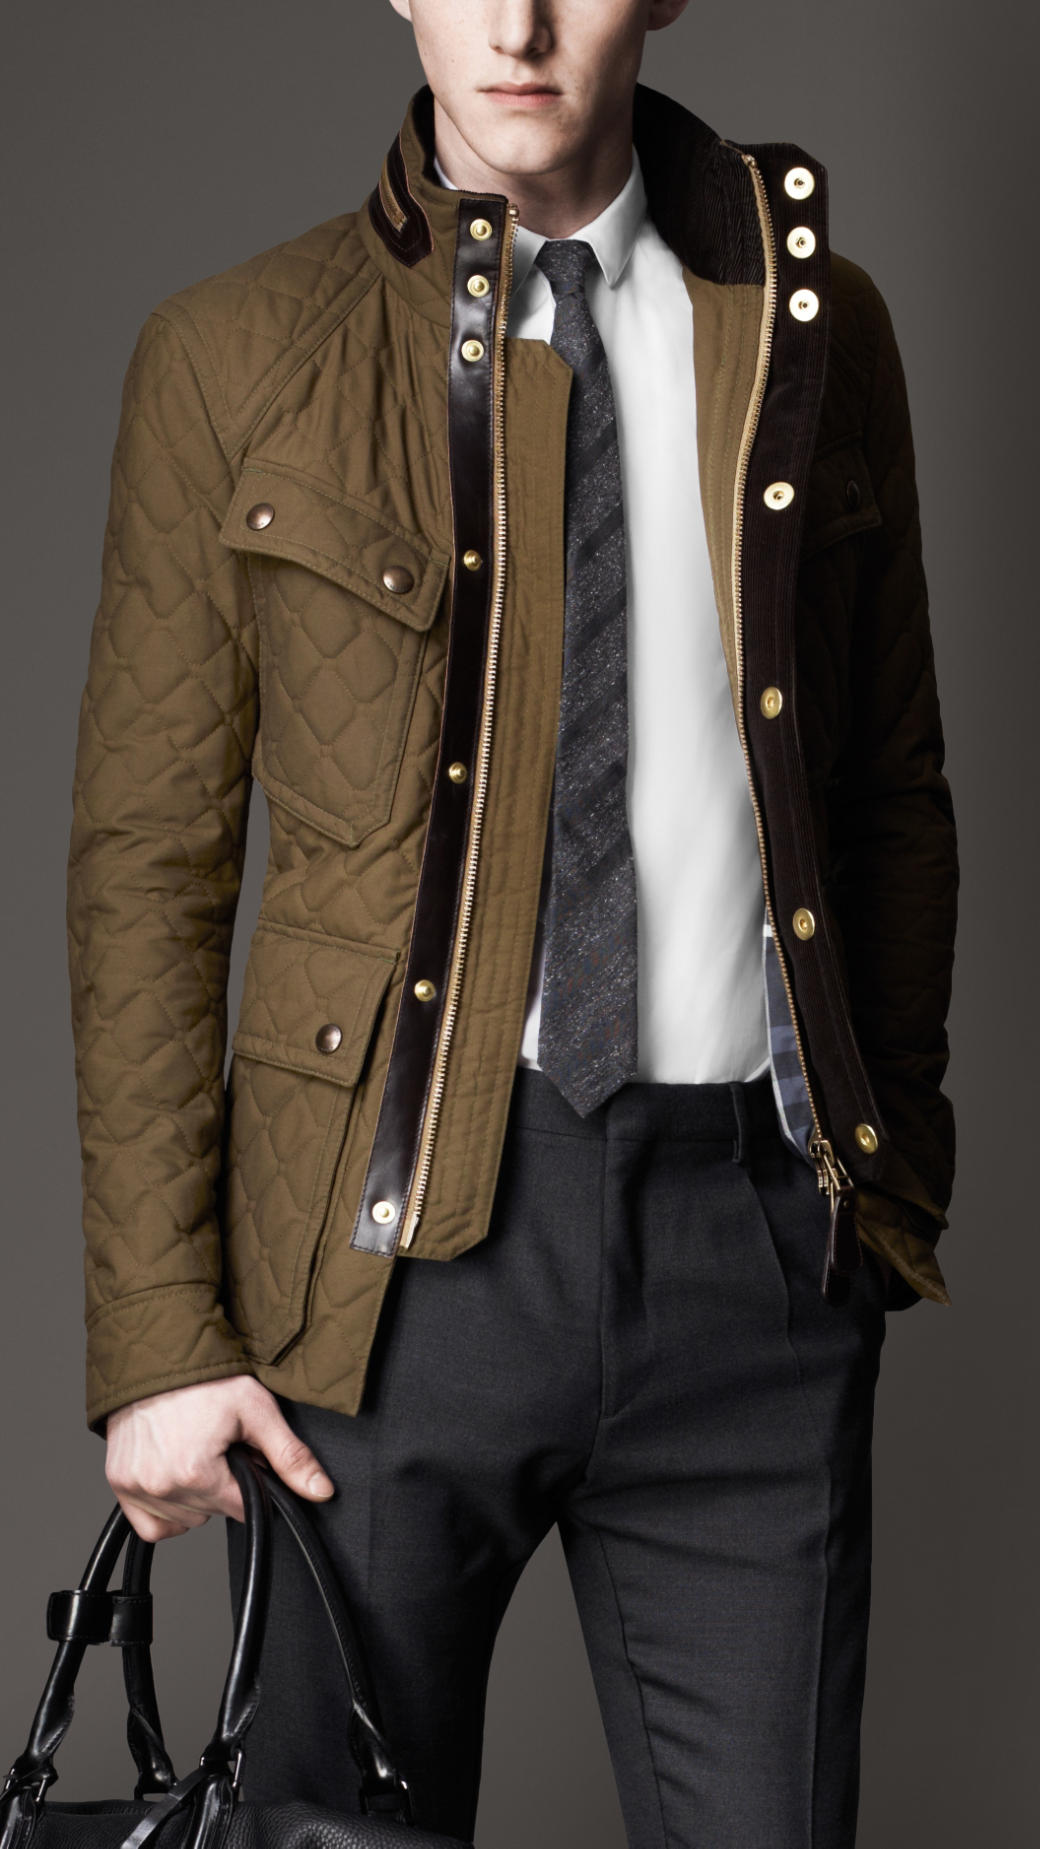 Burberry Waxed Cotton Field Jacket Flash Sales, SAVE 59%.